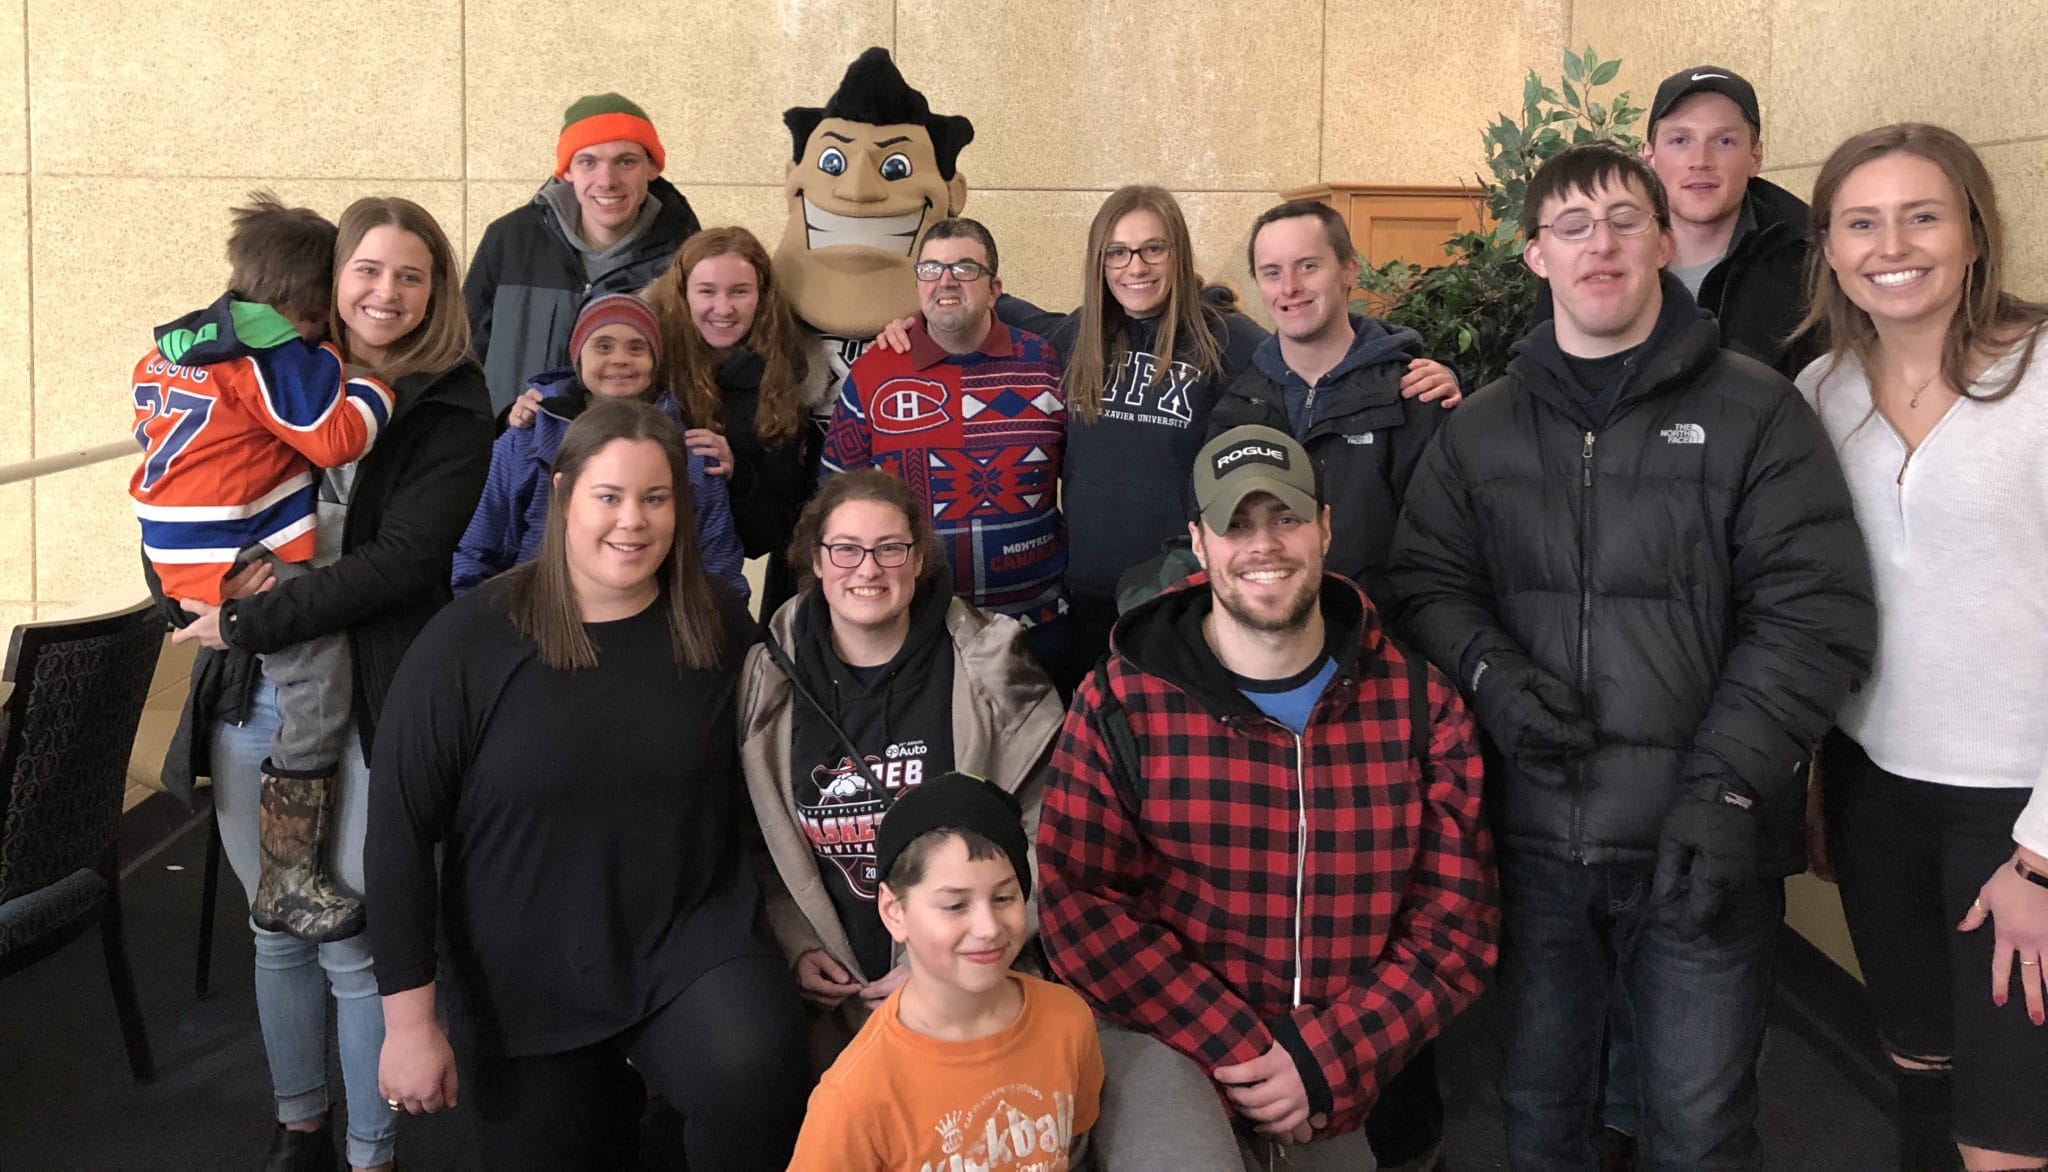 A group of adults and one child posing with a sports mascot indoors, smiling for the camera. some individuals wear various hockey jerseys.